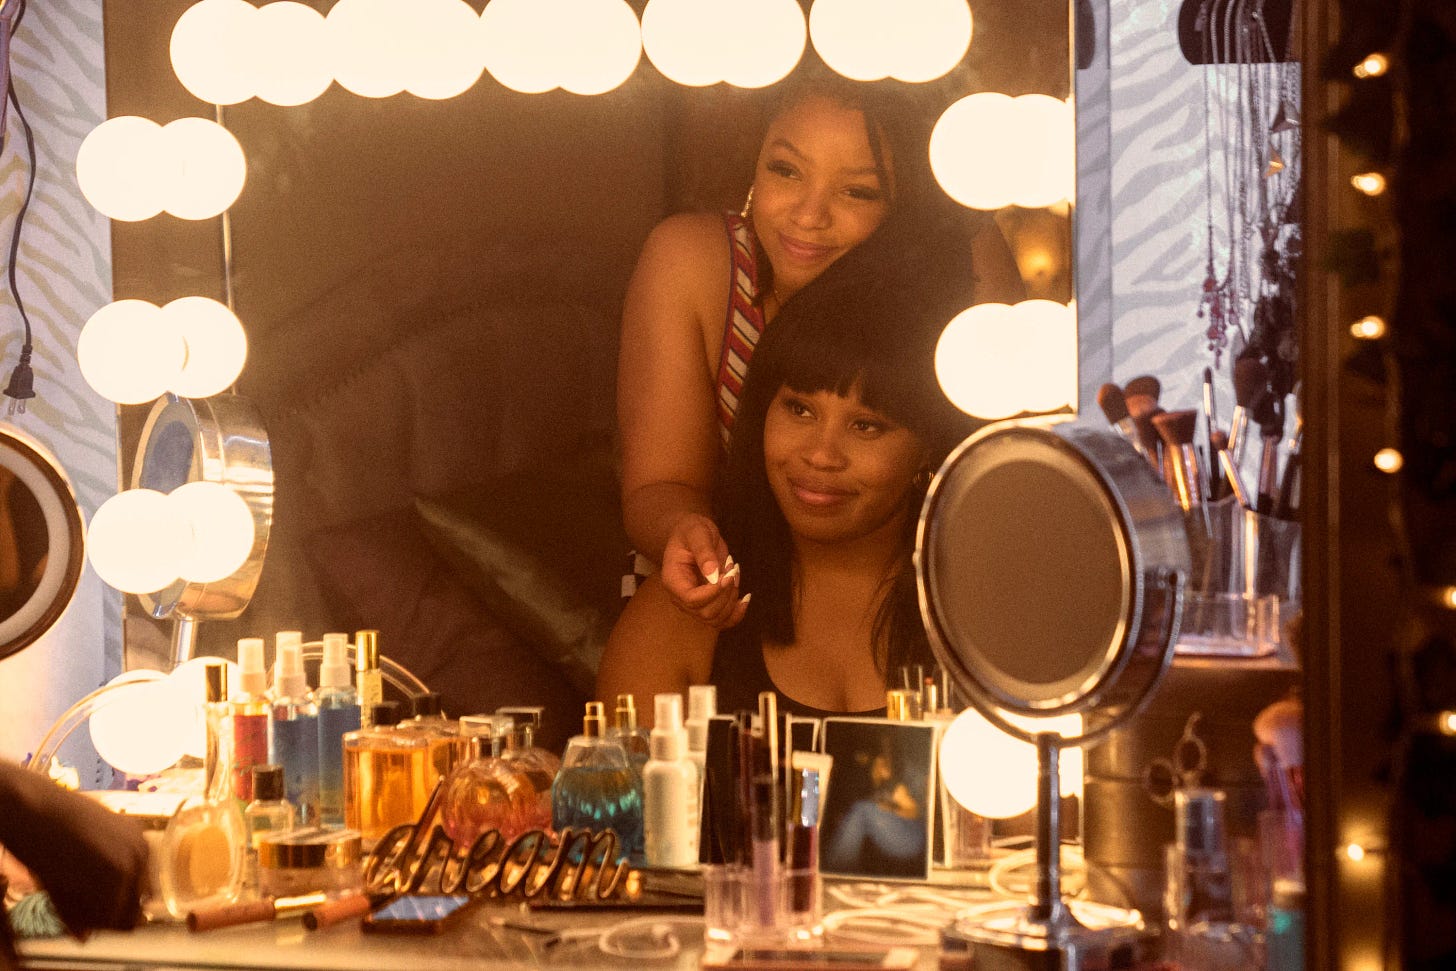 At a bedroom vanity with Hollywood lights around the mirror and cosmetics on the table surface, sits a young Black woman with bangs and shoulder-length hair. Behind her is another young Black woman, whose hair is pulled back, with her arm draped over the shoulder of the woman sitting. They are looking at each other in the mirror with sweet smiles. 